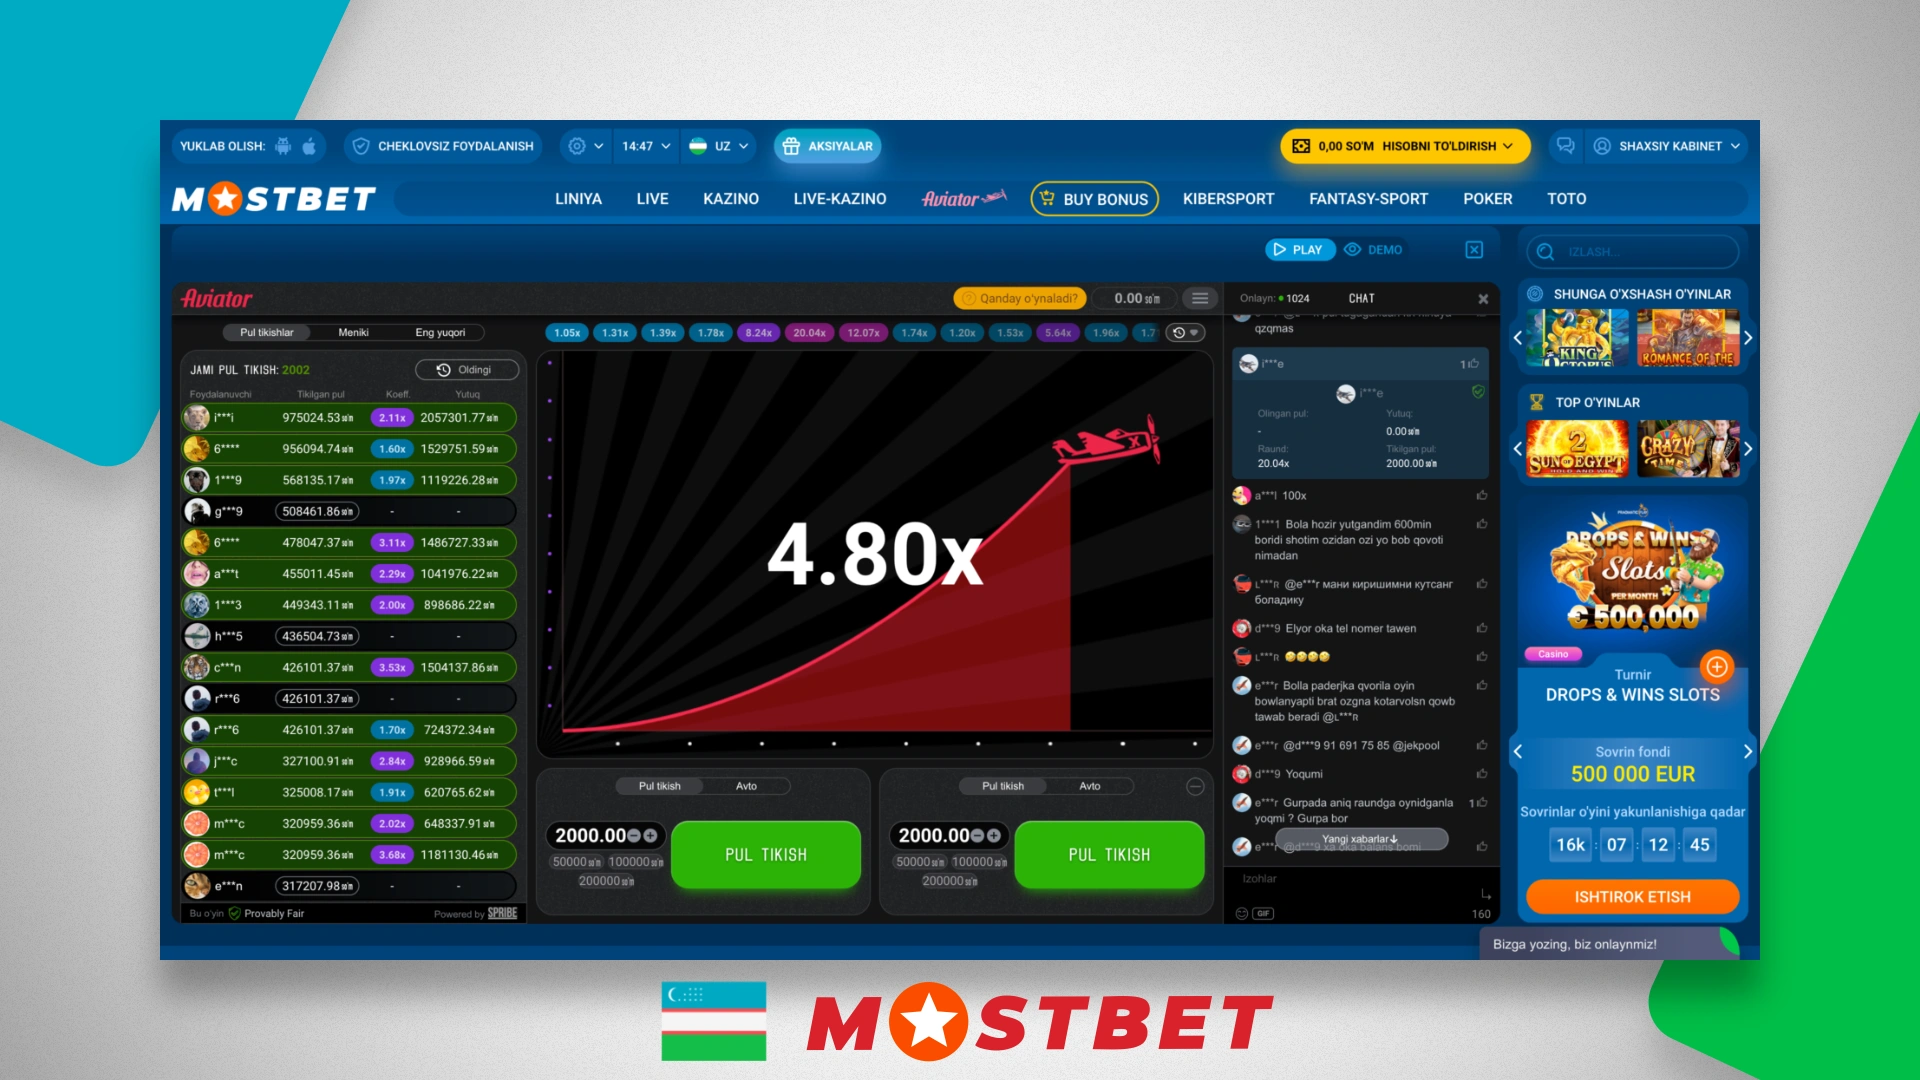 The Business Of Mostbet betting company and casino in India